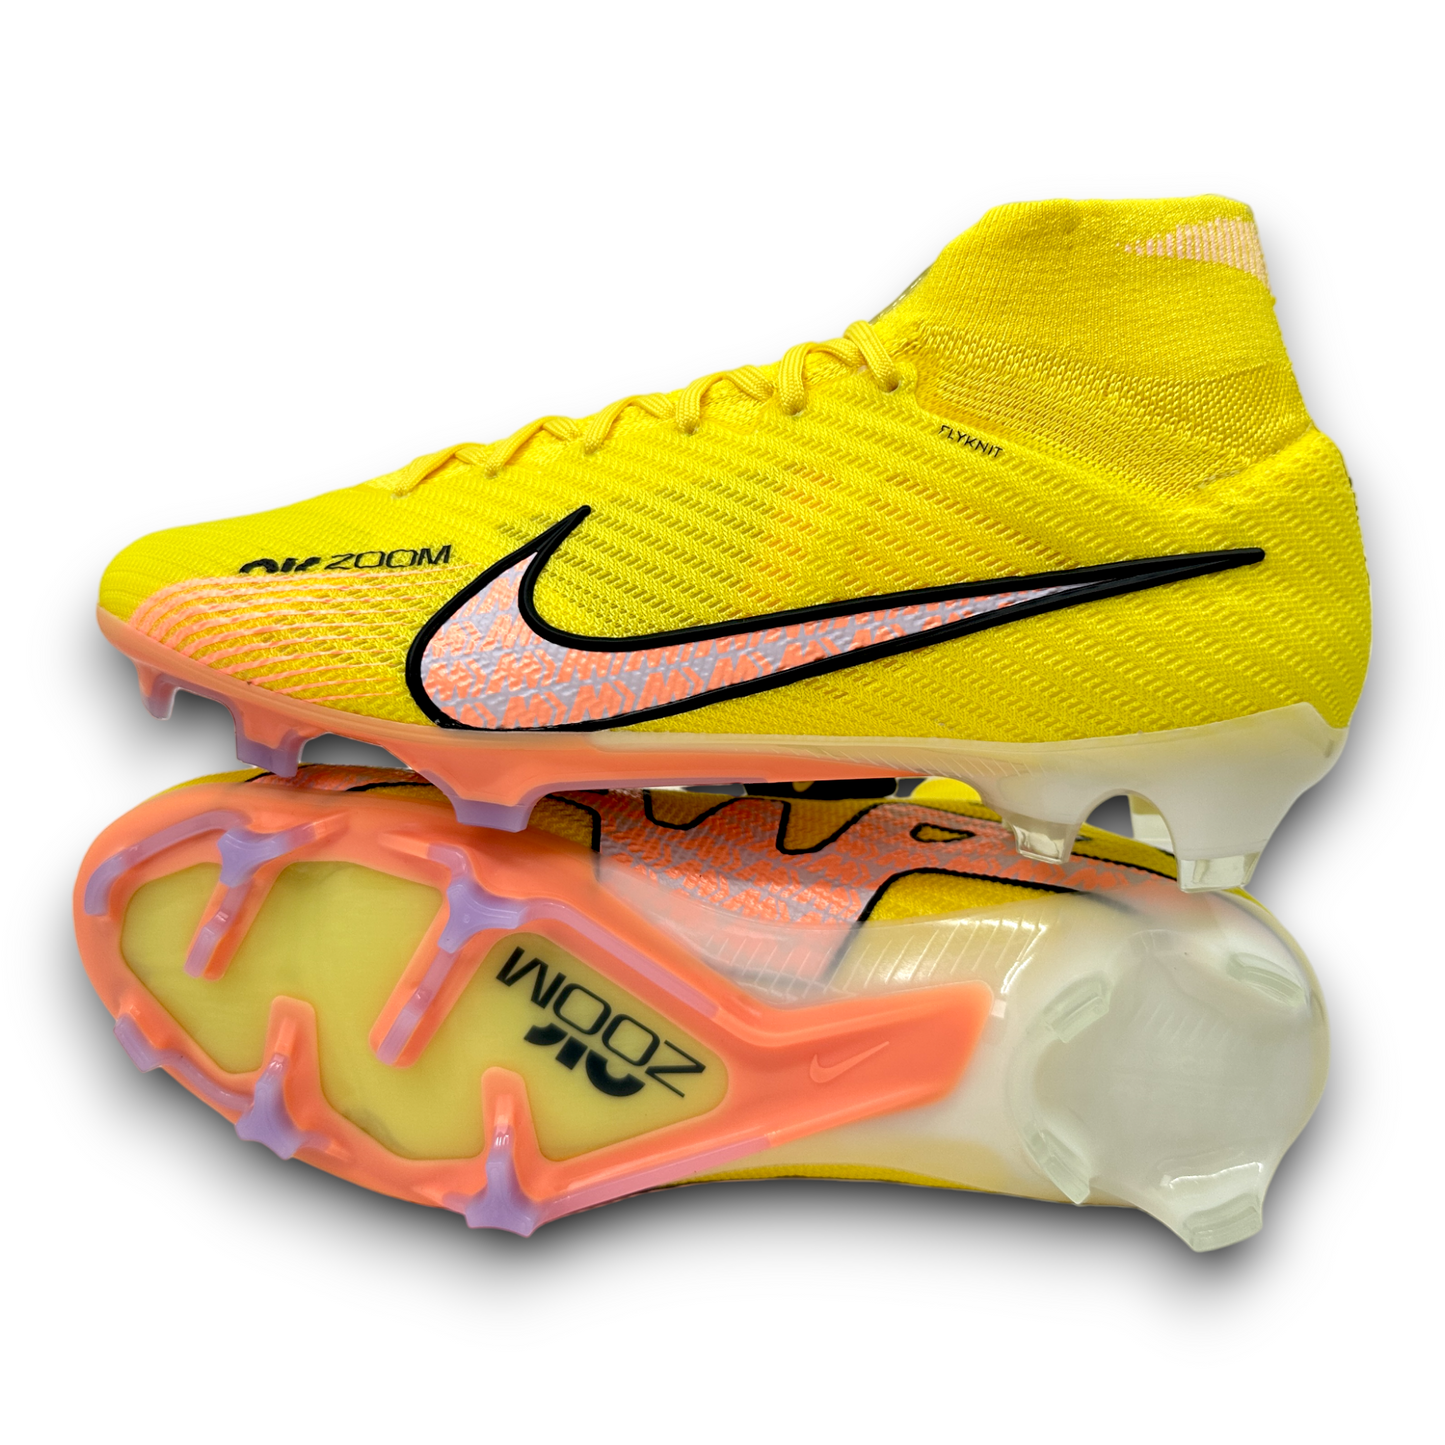 Nike Mercurial Superfly Elite 9 FG "Lucent Pack"